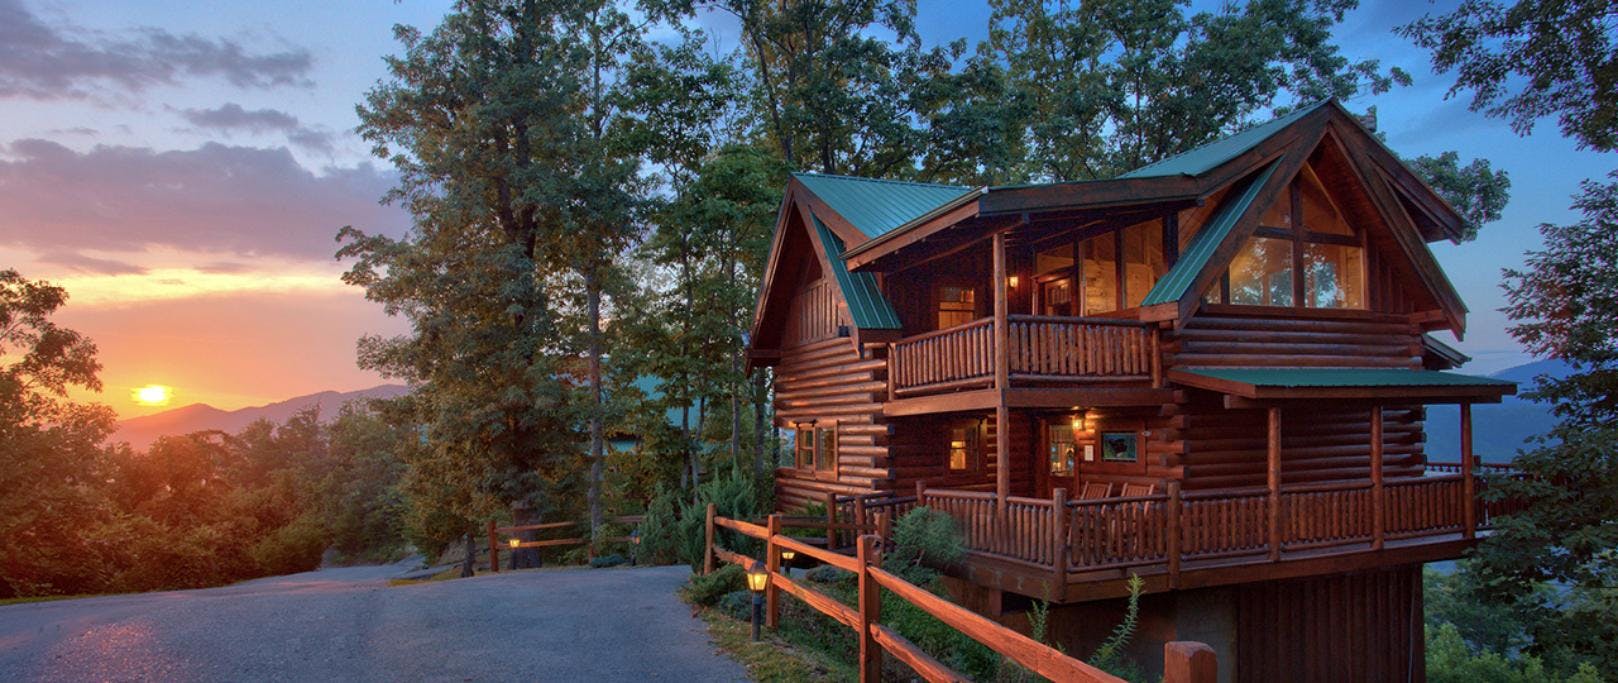 pigeon forge airbnb